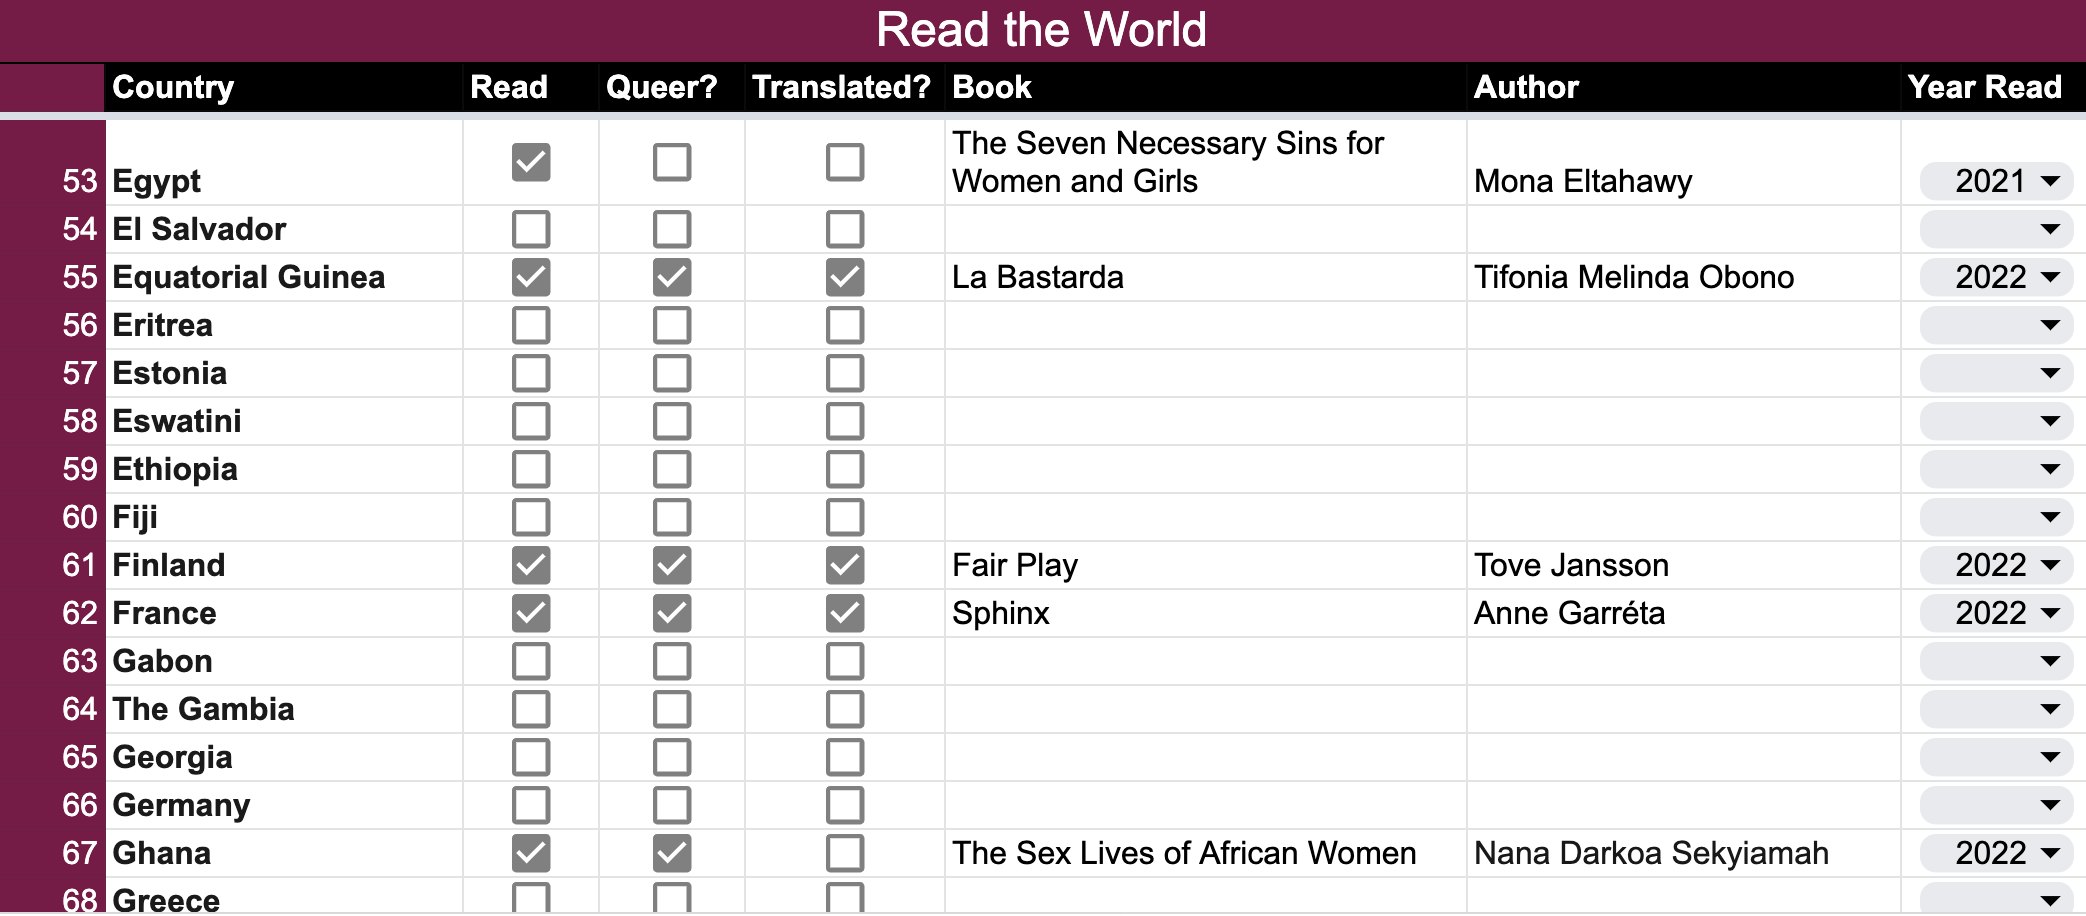 Screenshot of my Read the World tab. It lists various countries, with columns where I can check off if I've read a book from there, if it was queer, and if it was translated. Then there are columns for the title, author, and date read. 